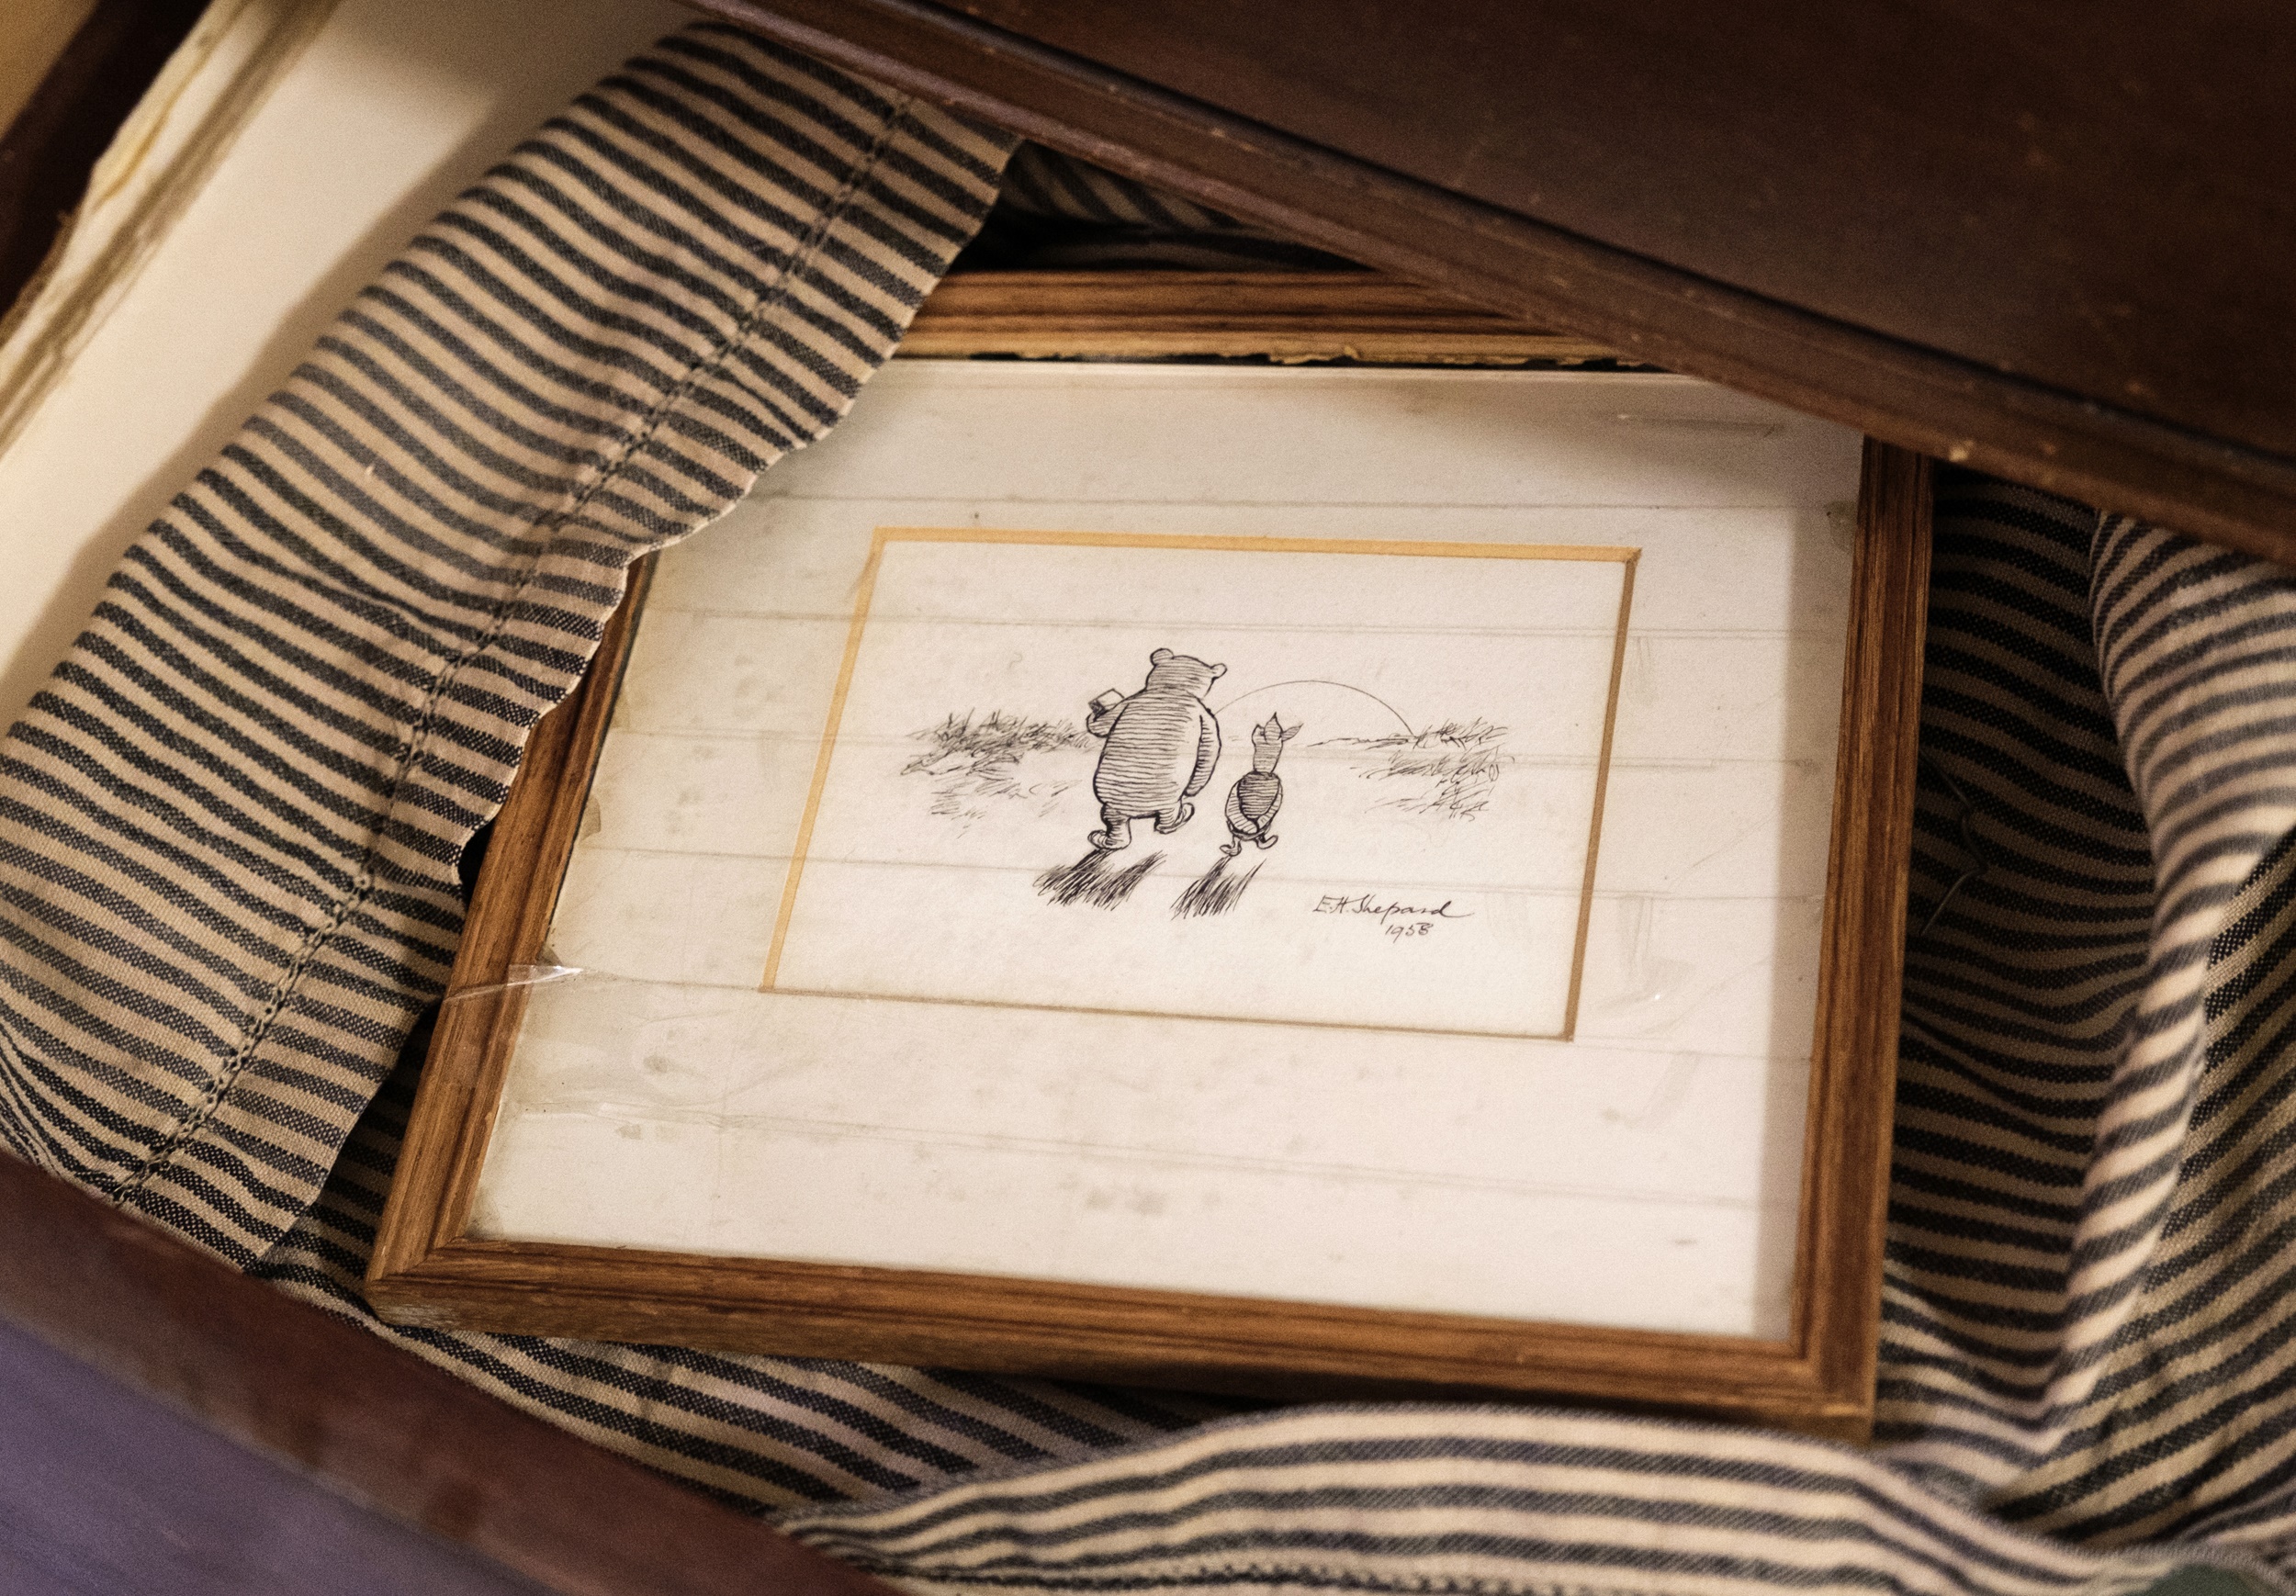 Pooh and Piglet Original Drawing Discovered in Cellar Drawer